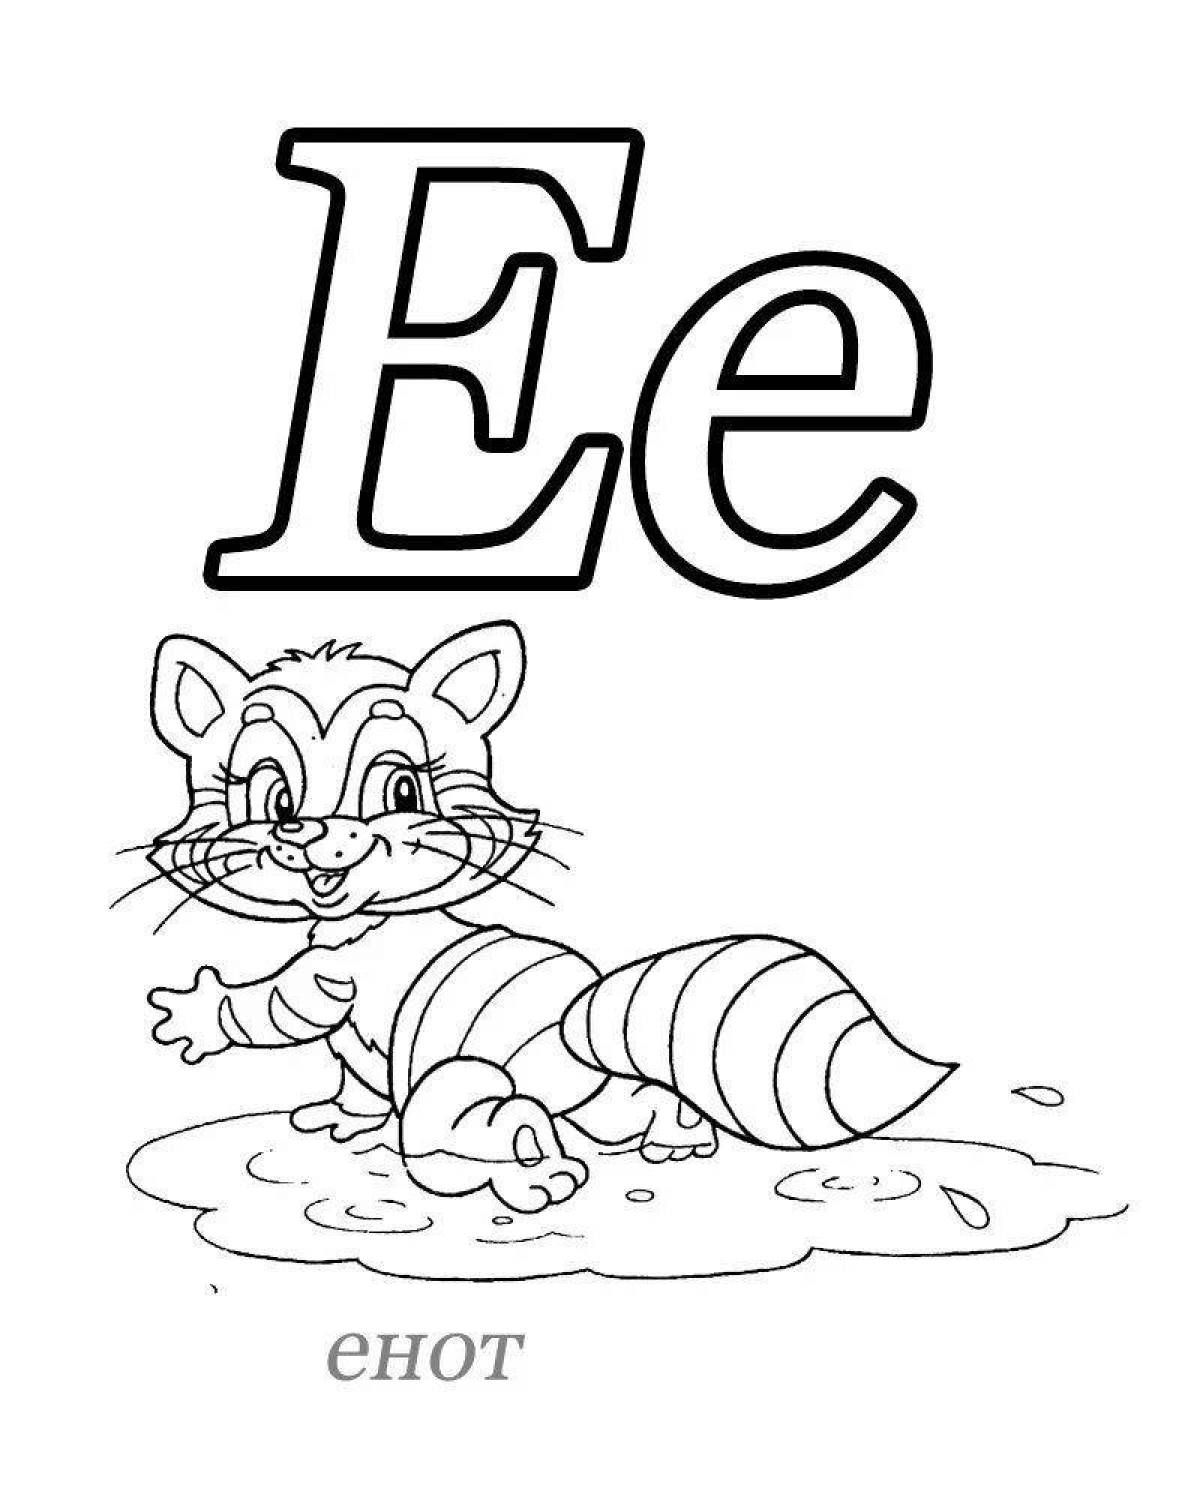 Creative alphabet coloring book for kids